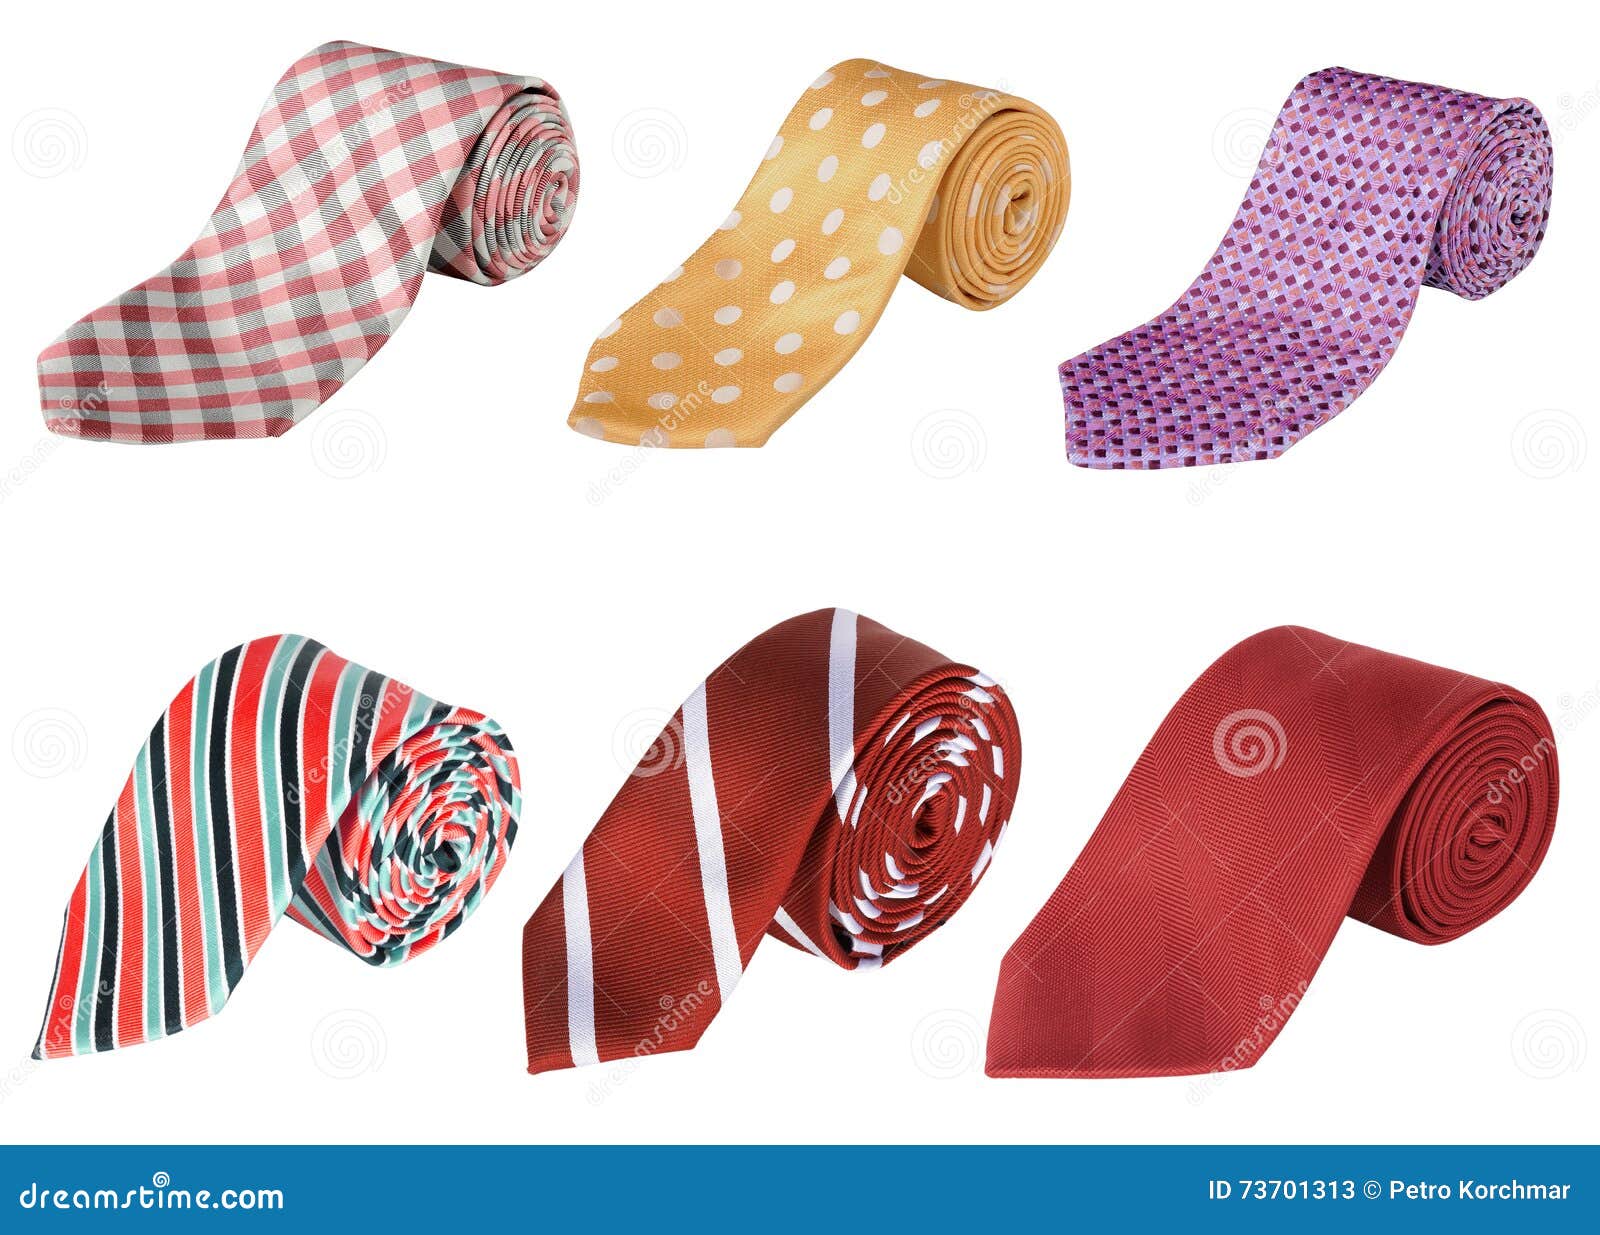 Business ties rolled up stock image. Image of isolate - 73701313